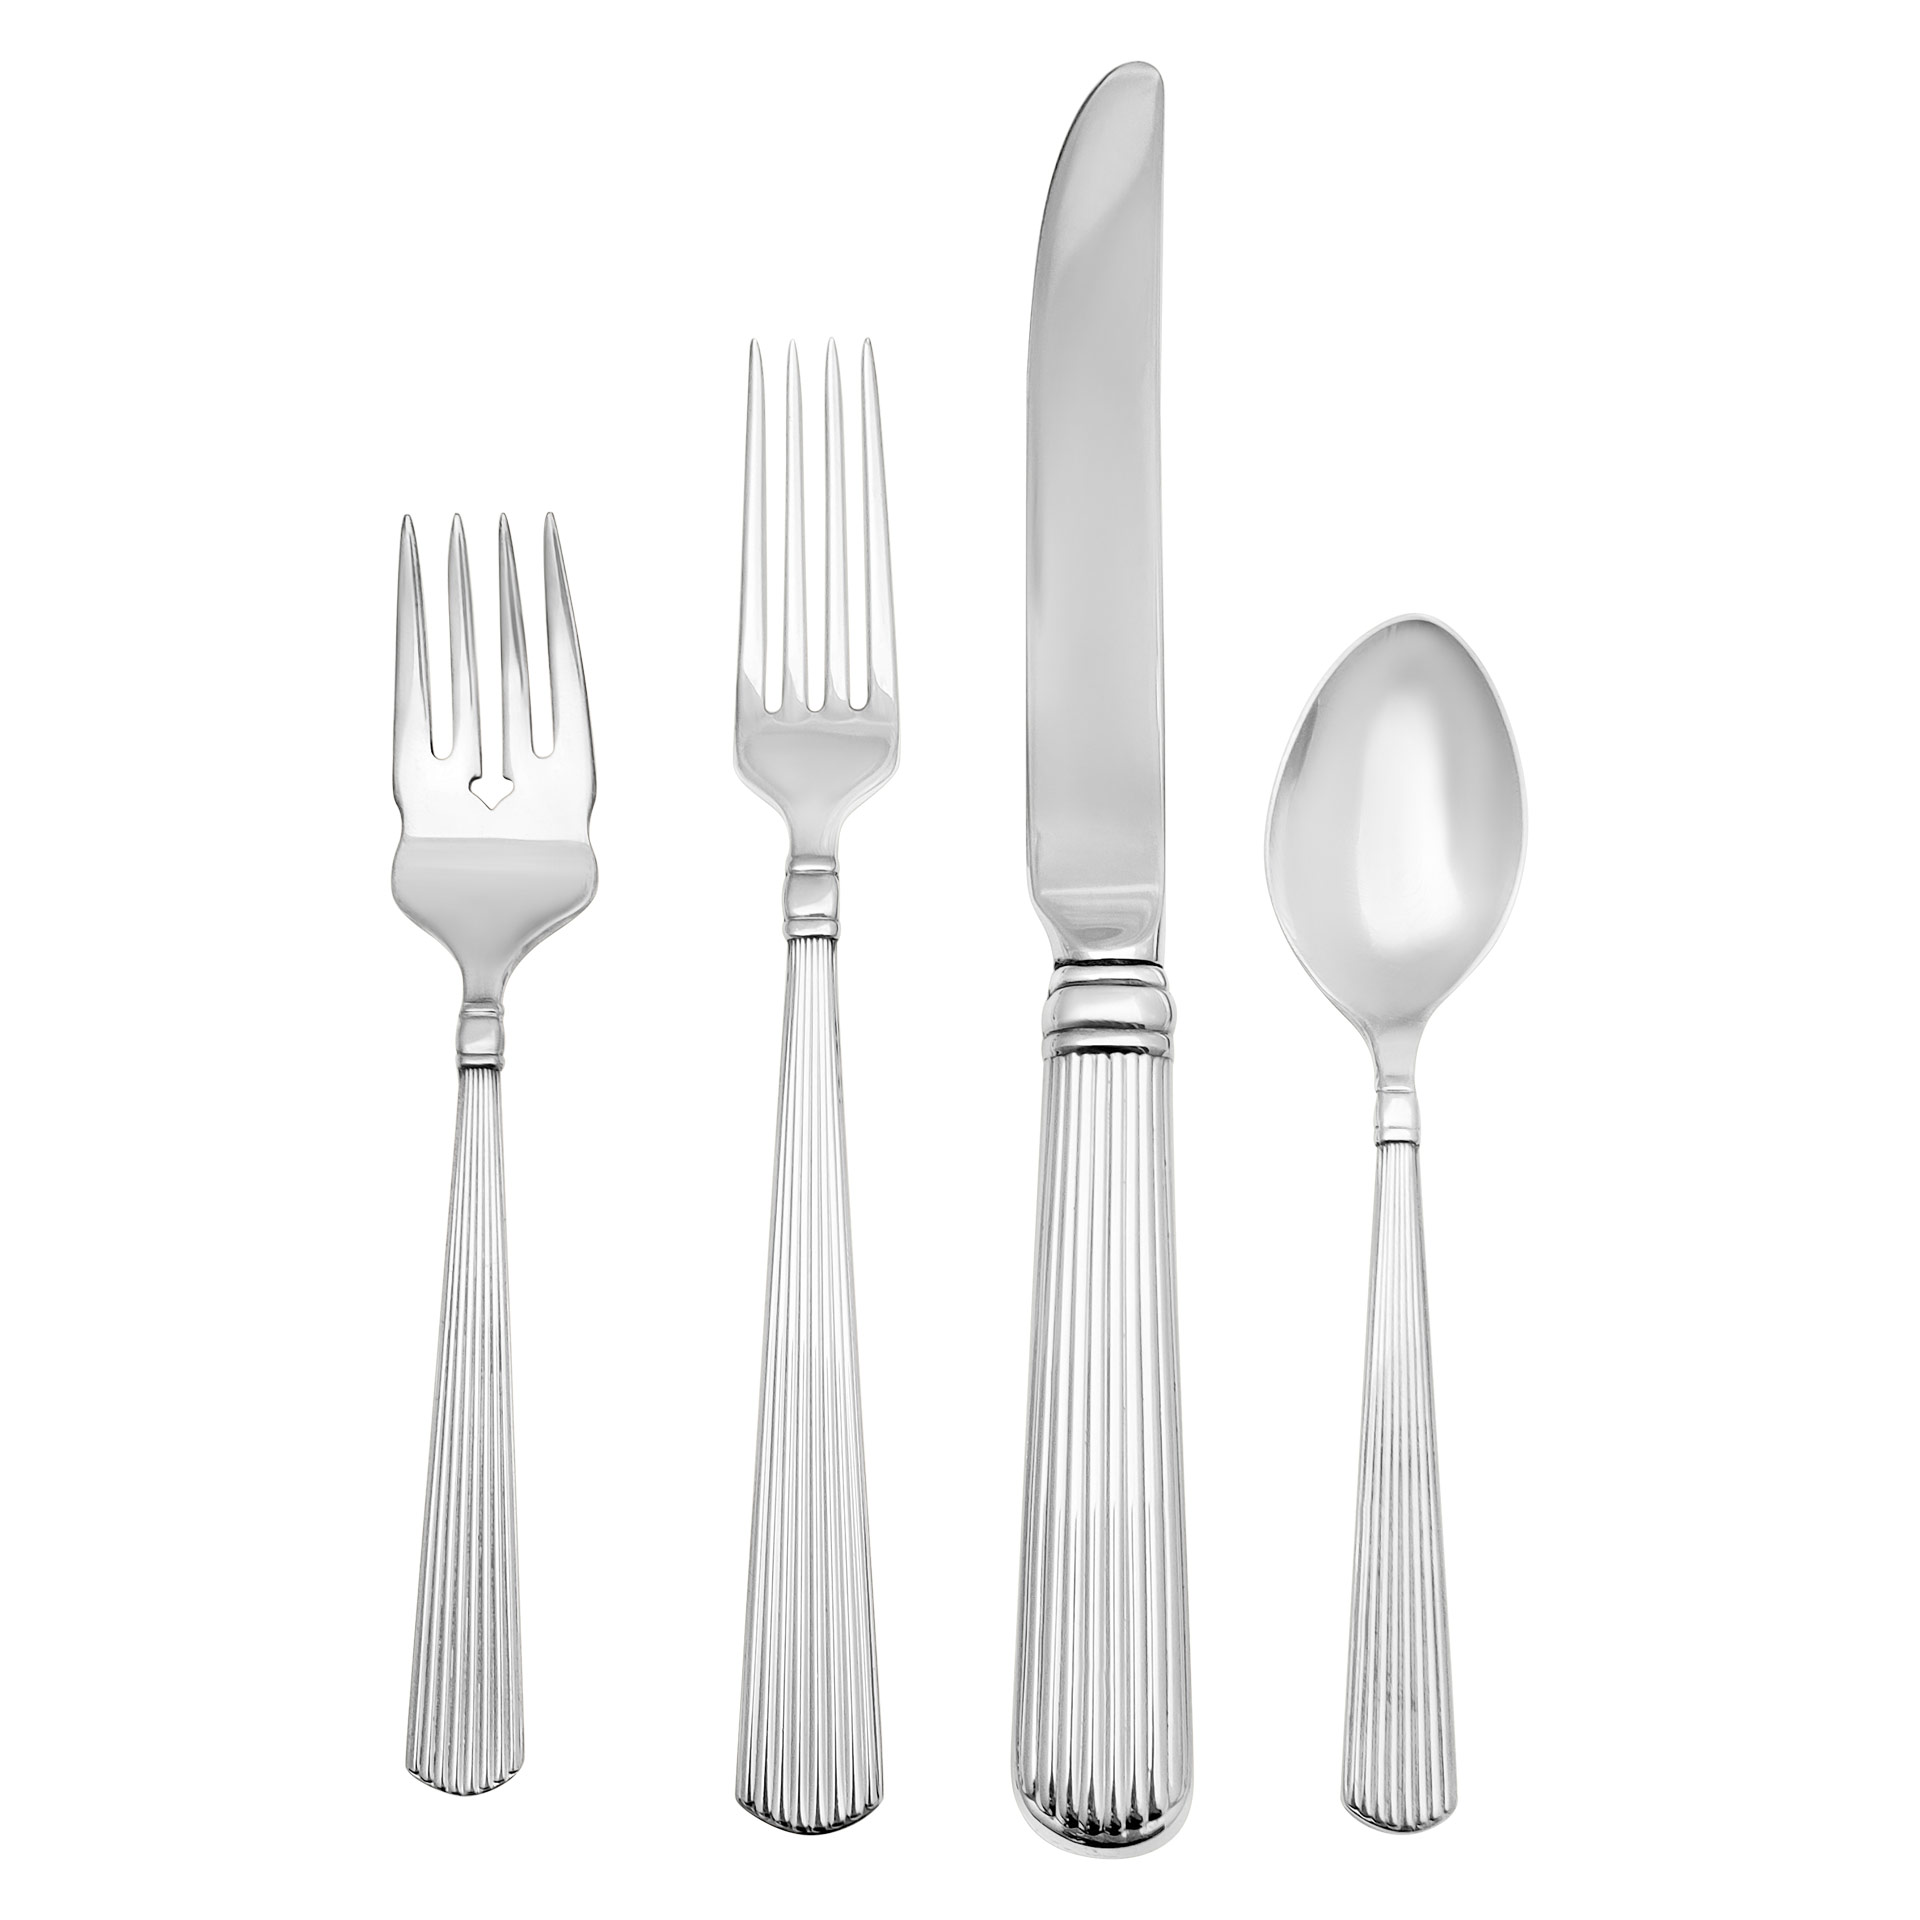 "ASHMONT" Sterling Silver Flatware Set patented in 1990 by Reed & Barton- 4 place set for 8 with 5 Serving pieces. As new Condition.Most of the pieces still in their original unopened plastic sleeves. image 1